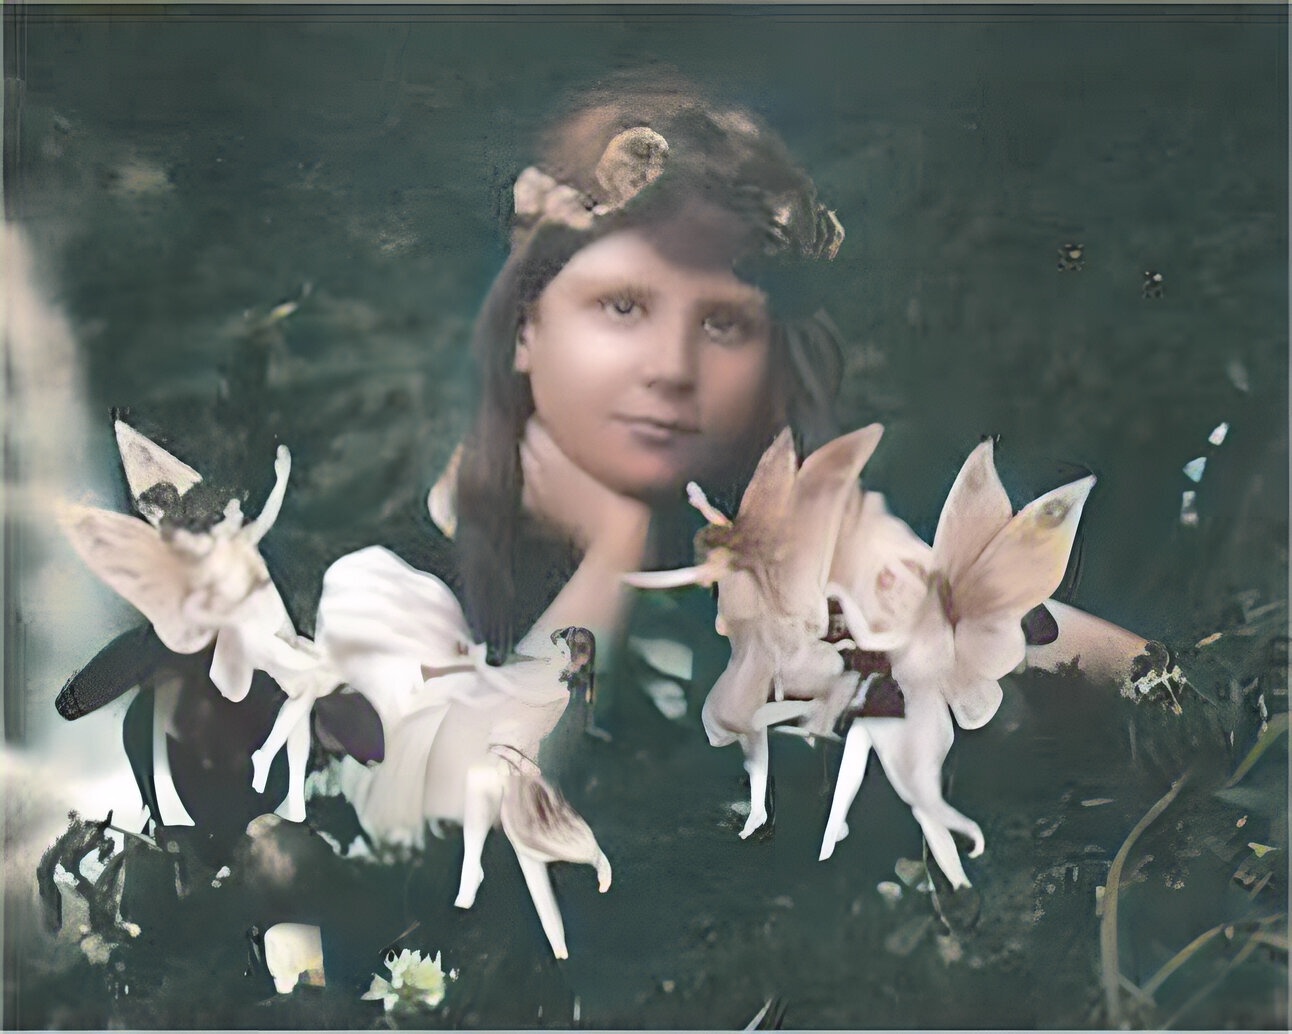 Cottingley Fairies by Elsie Wright, 1917